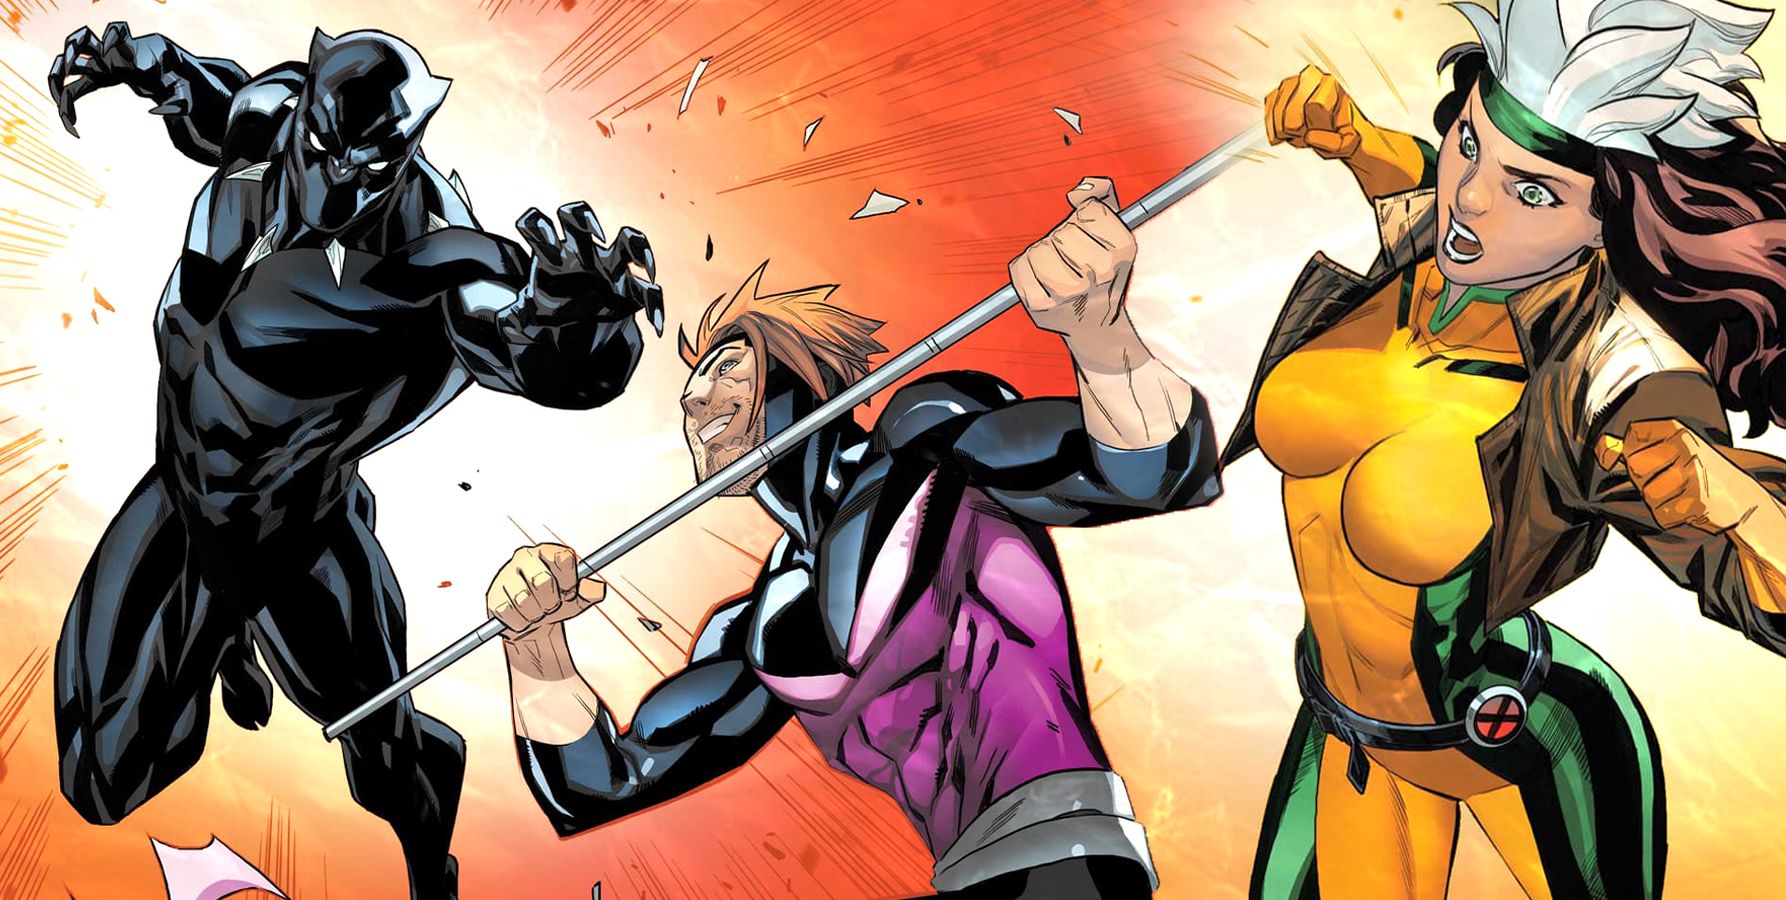 Rogue and Gambit jump up to meet a leaping Black Panther in combat.